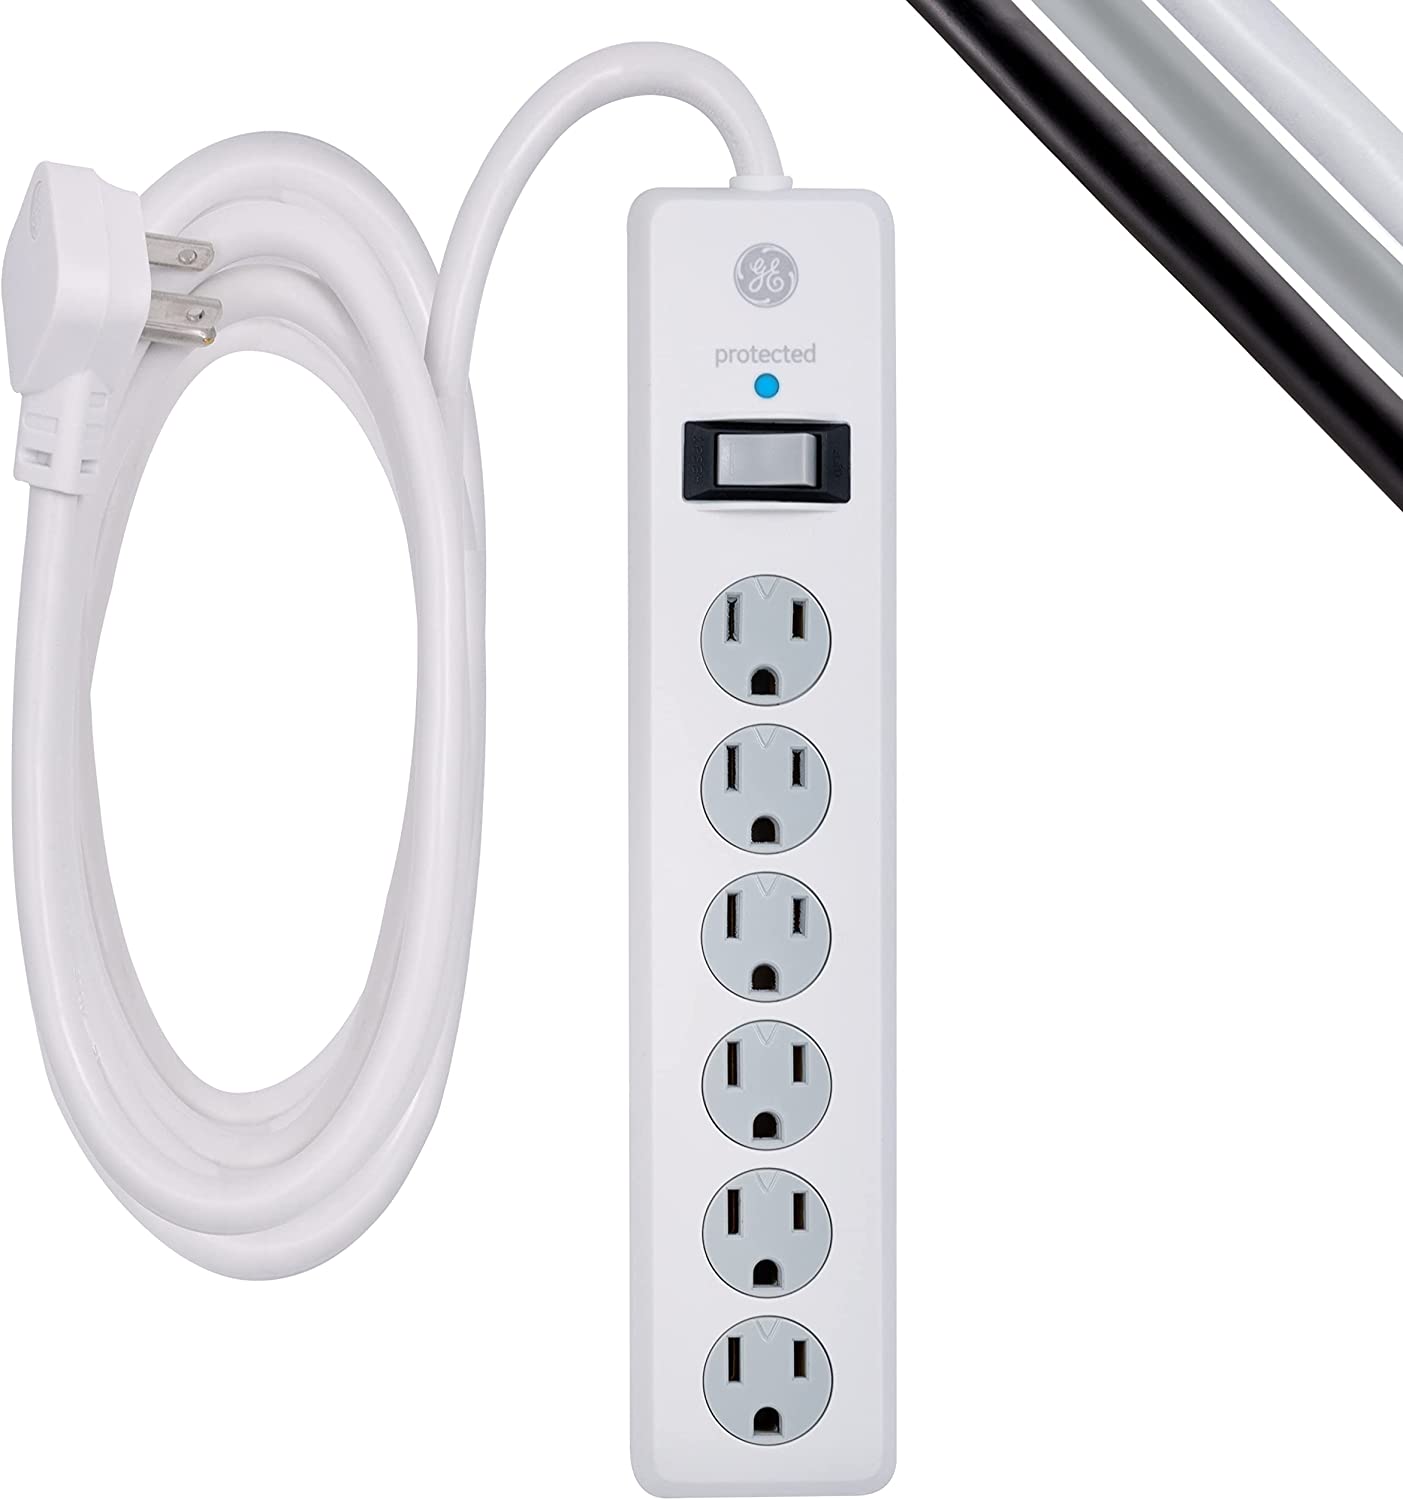 GE Extra-Long Power Strip Surge Protector